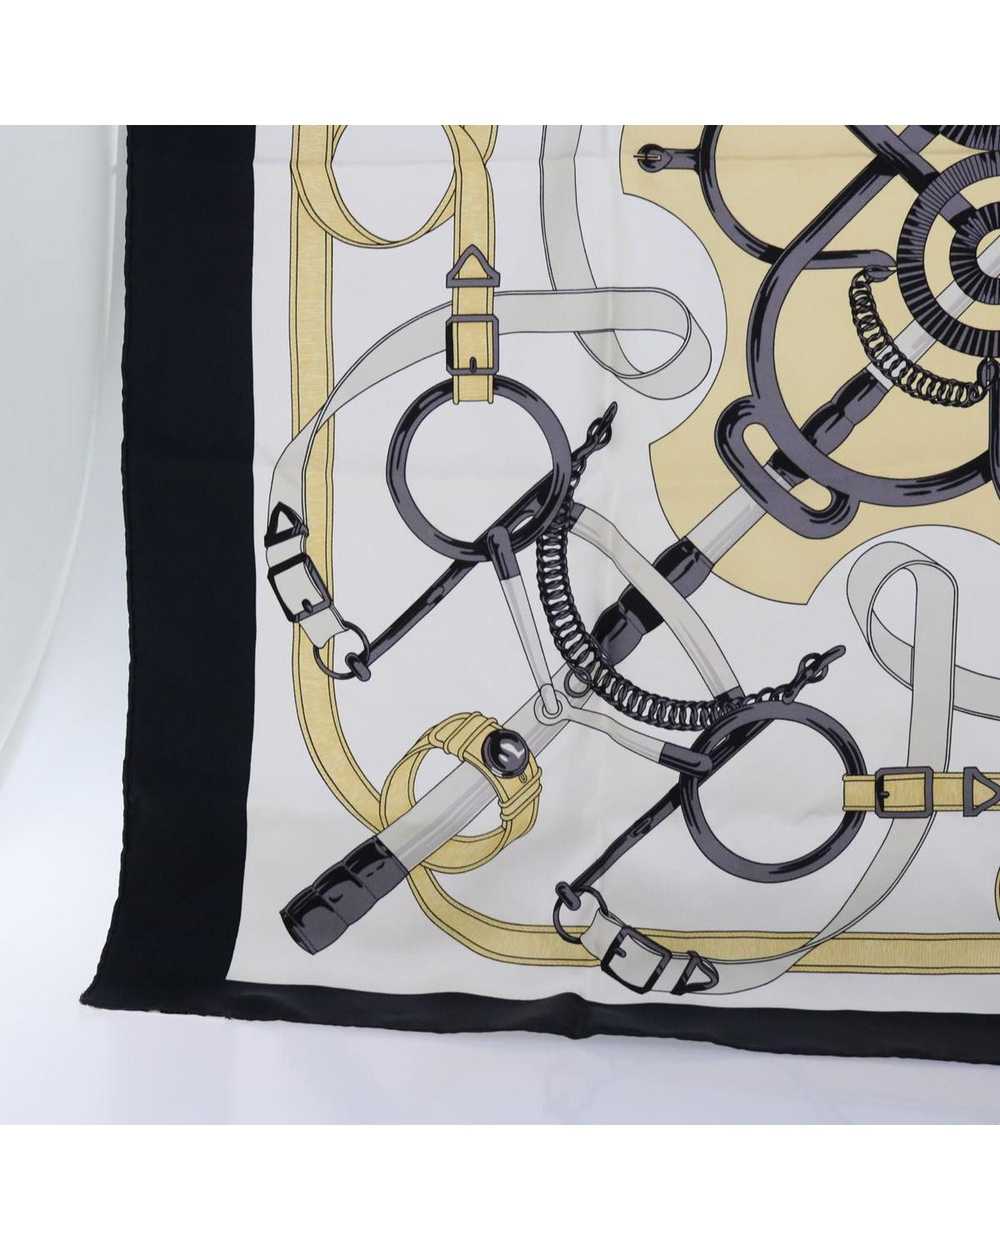 Hermes Silk Eperon dOr Scarf with Horse Motif - image 10